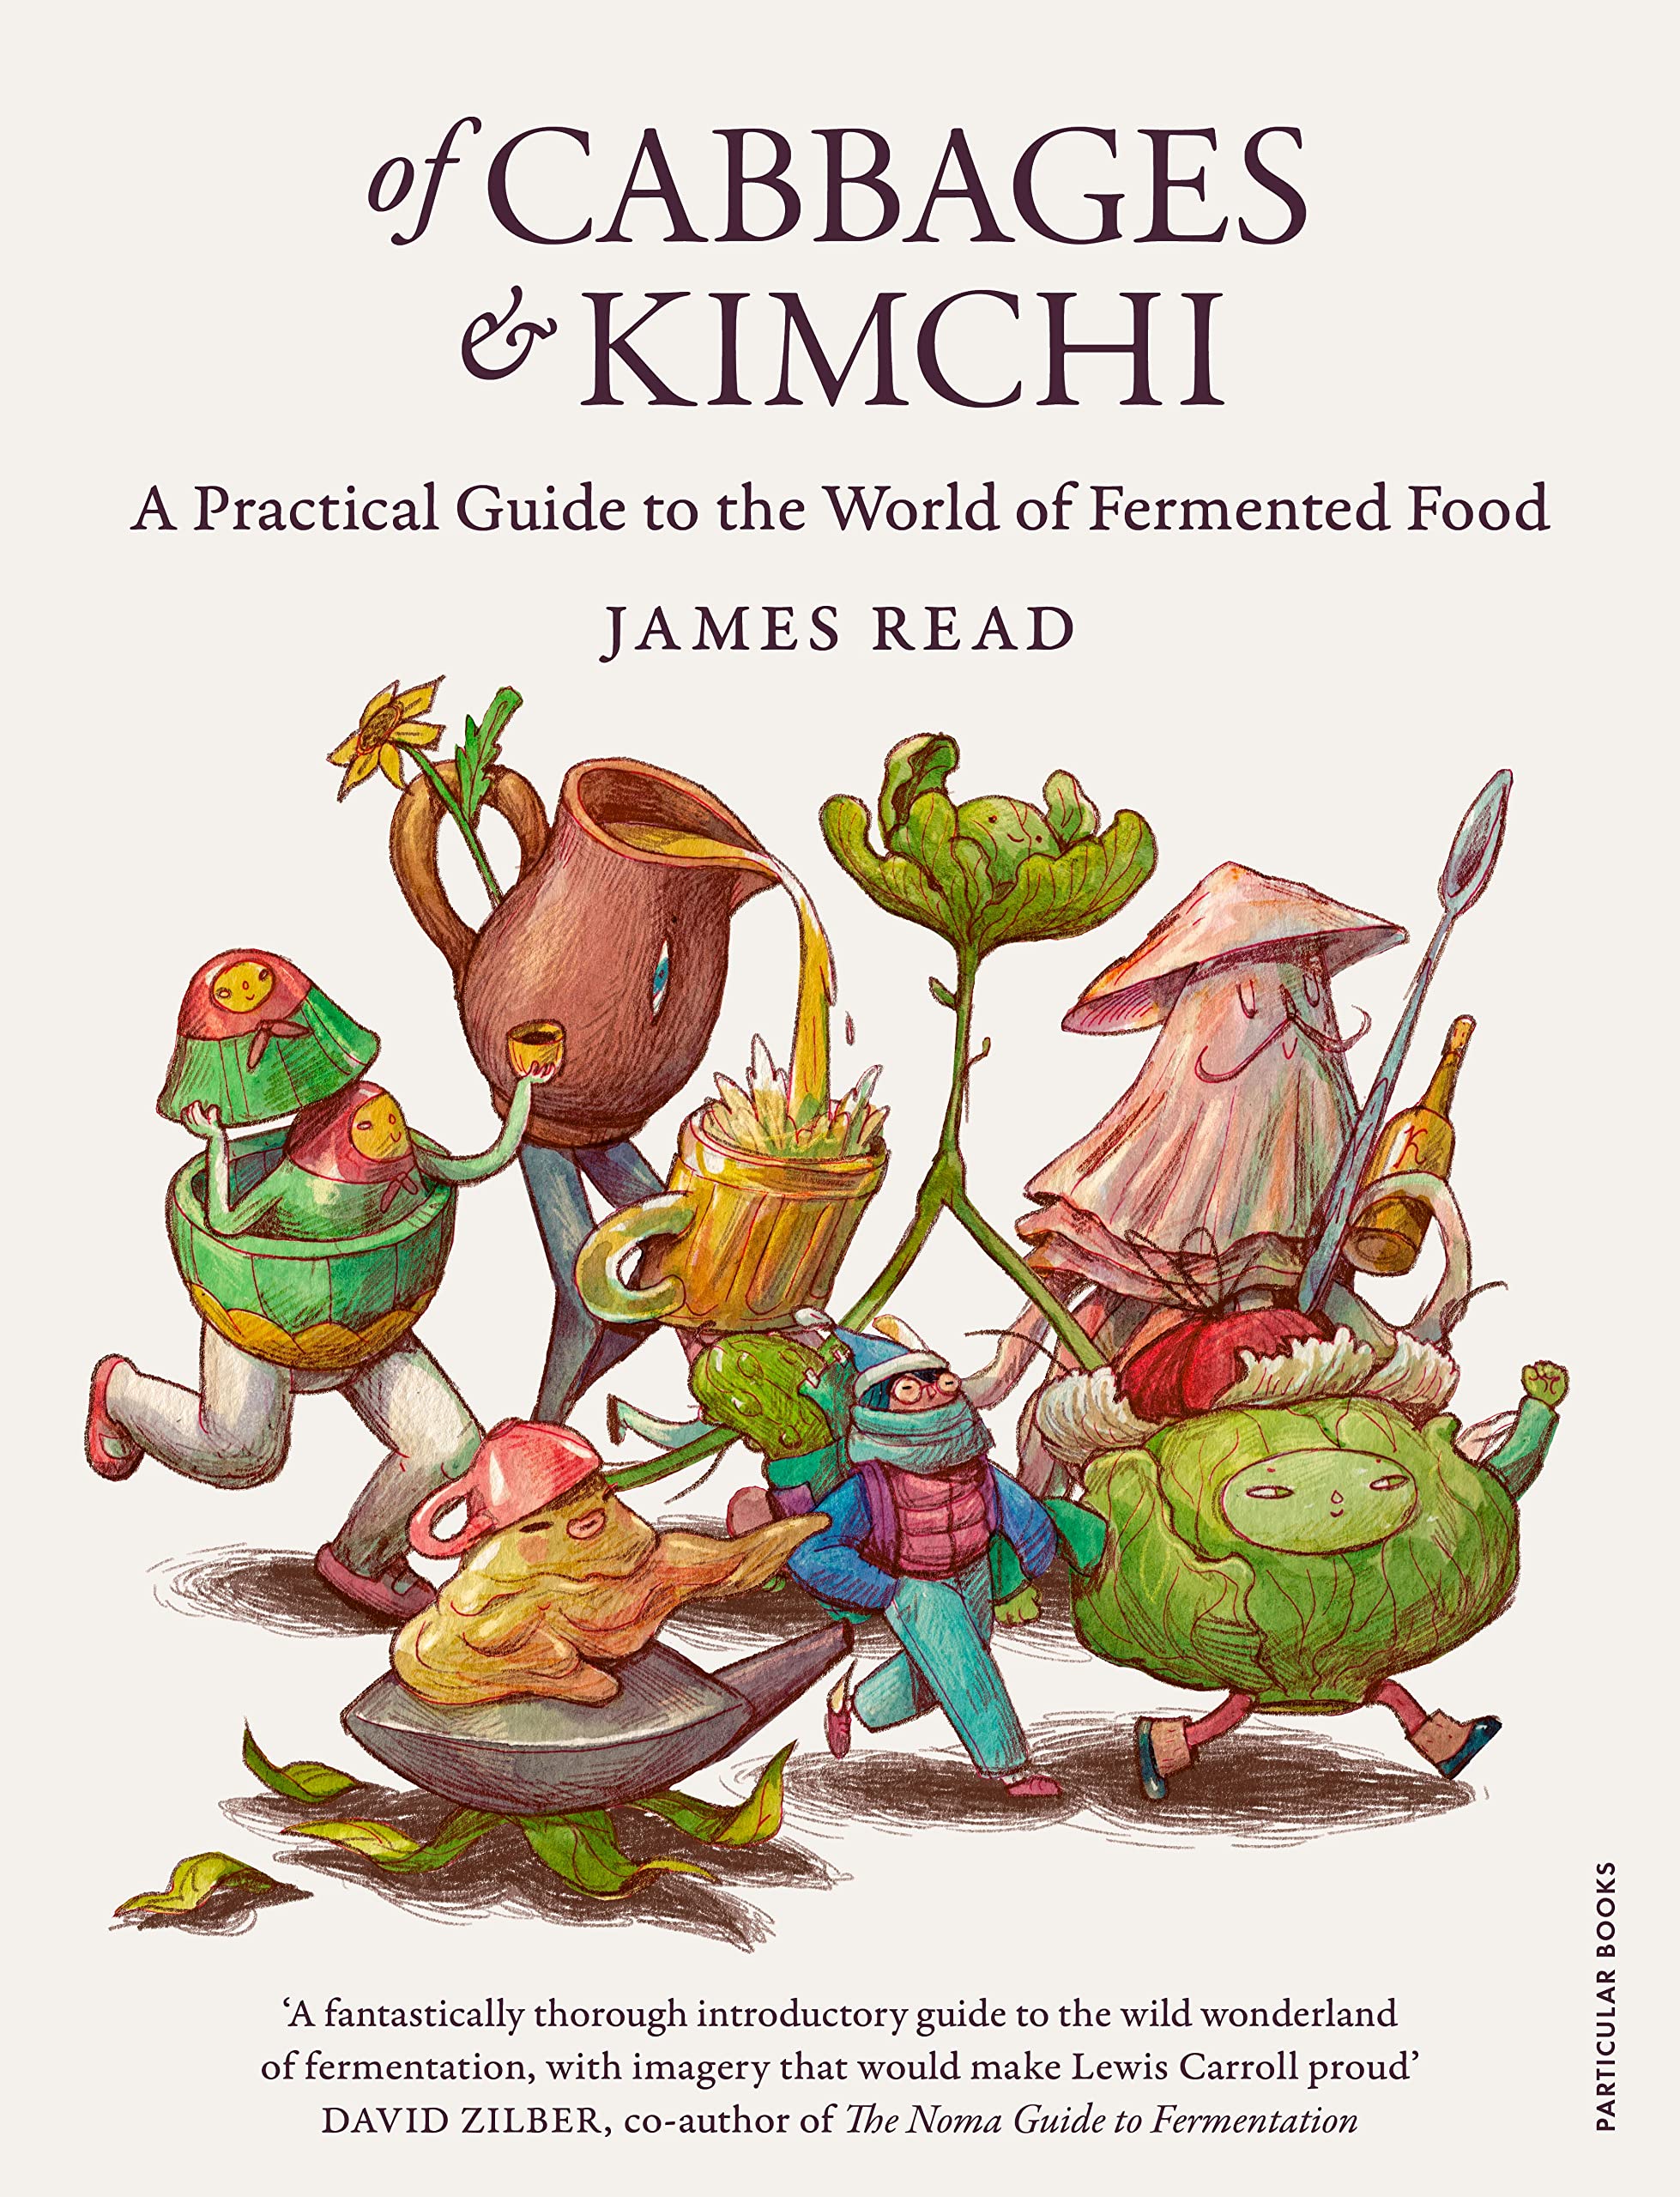 Of Cabbages and Kimchi: A Practical Guide to the World of Fermented Food (James Read) *Signed*